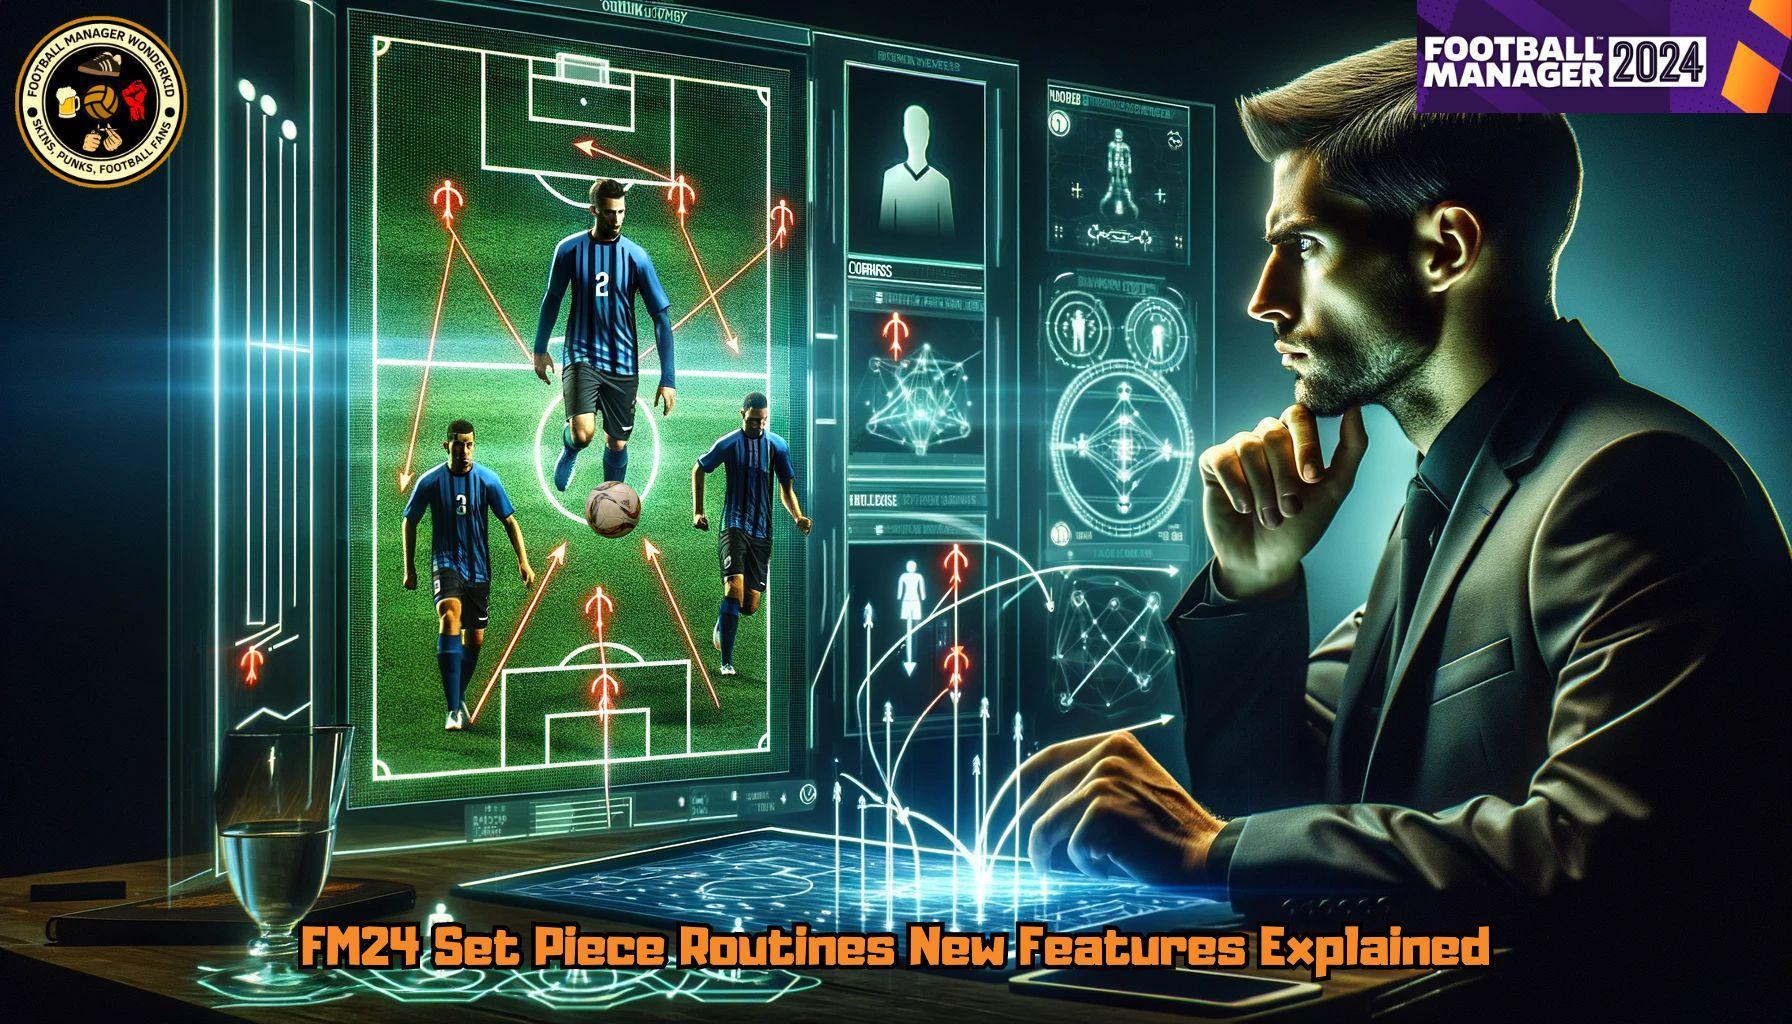 FM24 Set Piece Routines - New Football Manager Set Piece Features - Full Explained